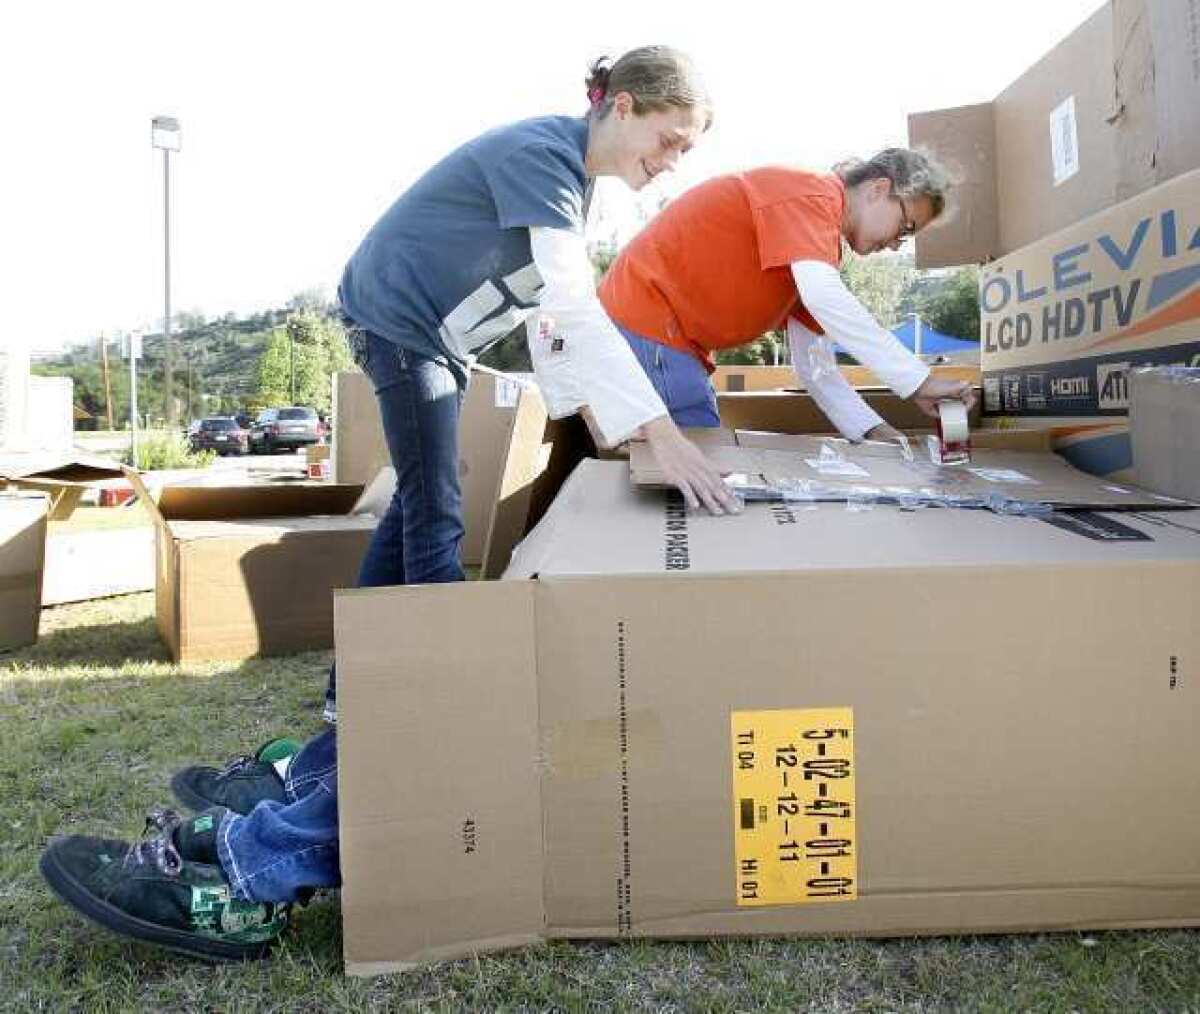 Emily Hirsch, 16, and Olivia Brandt, 14, tape boxes into place on the box city they helped create at La Canada United Methodist Church where a box city was set up for kids to get an authentic feeling of what it's like to be hungry and sleeping in a home of cardboard. The kids are participating in a 30-hour fast as part of World Vision 30 Hour Famine as a fundraiser with the goal of making $3,600.